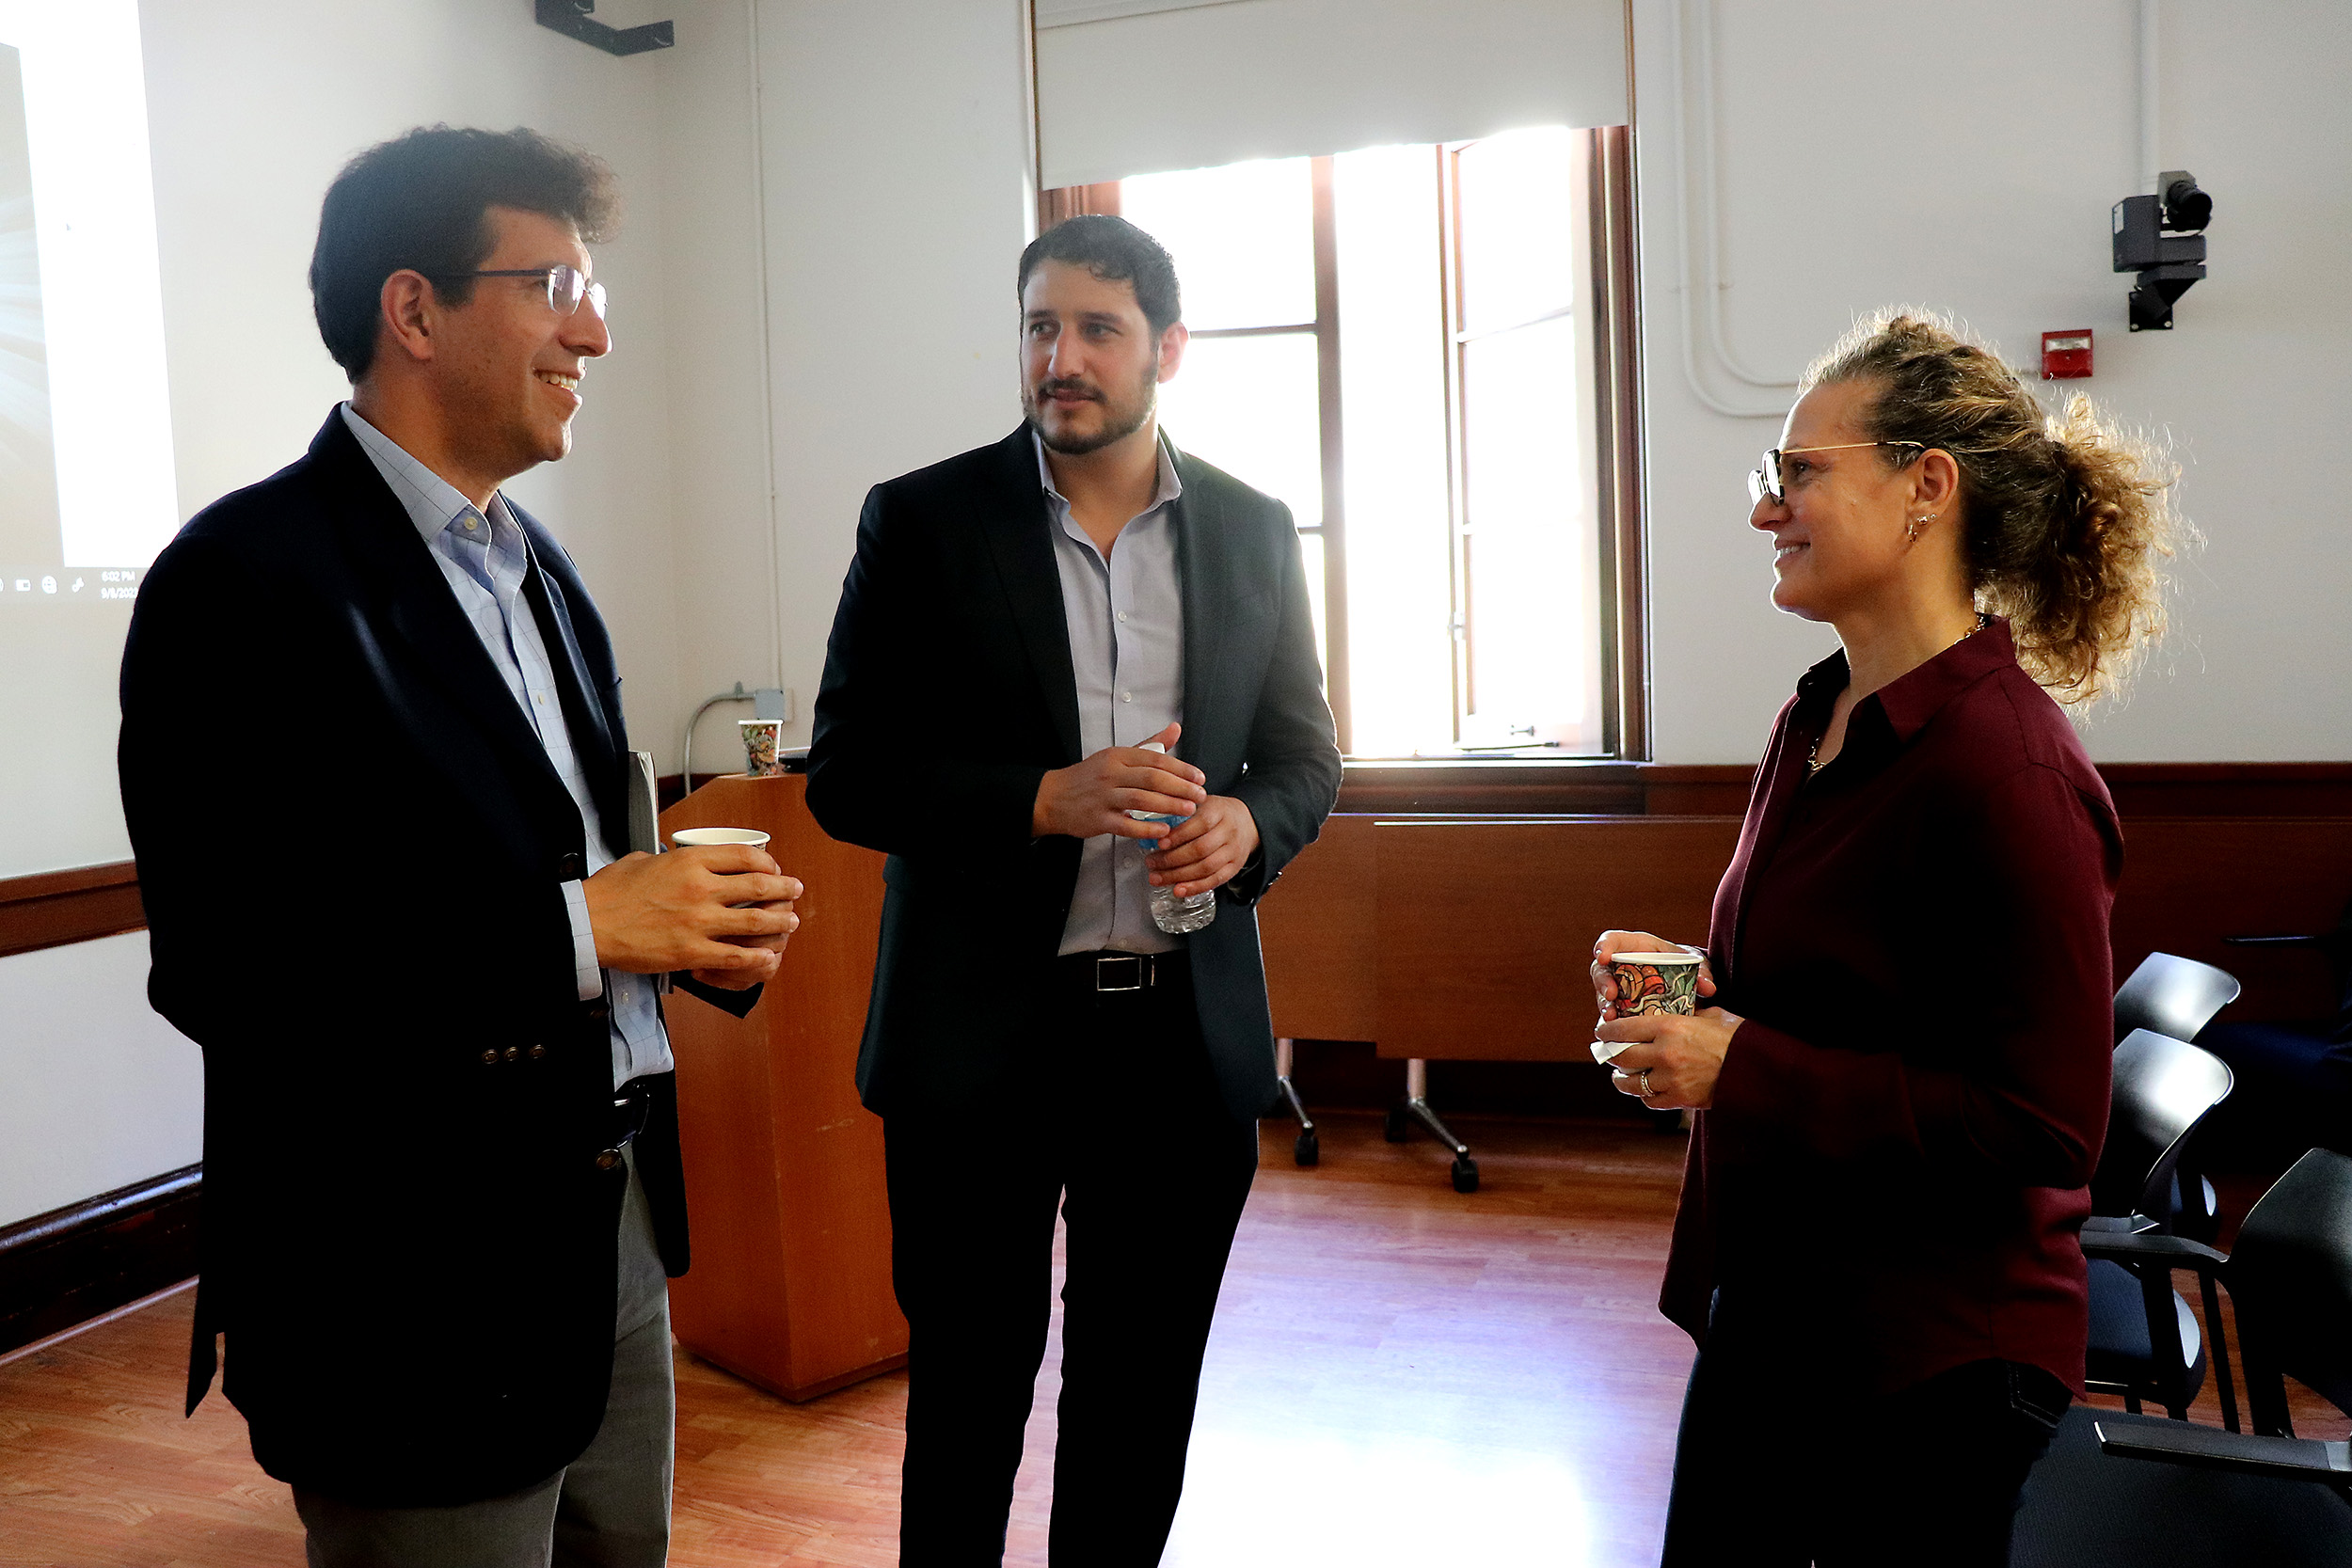 ITS Director Daniel Rodriguez and Assistant Director Laura Melendy welcome Yotam Avrahami, Intelligent and  Yotam Avrahami, Intelligent and Green transportation lead commercial and PPP programs, Deloitte, to the ITS Transportation Seminar